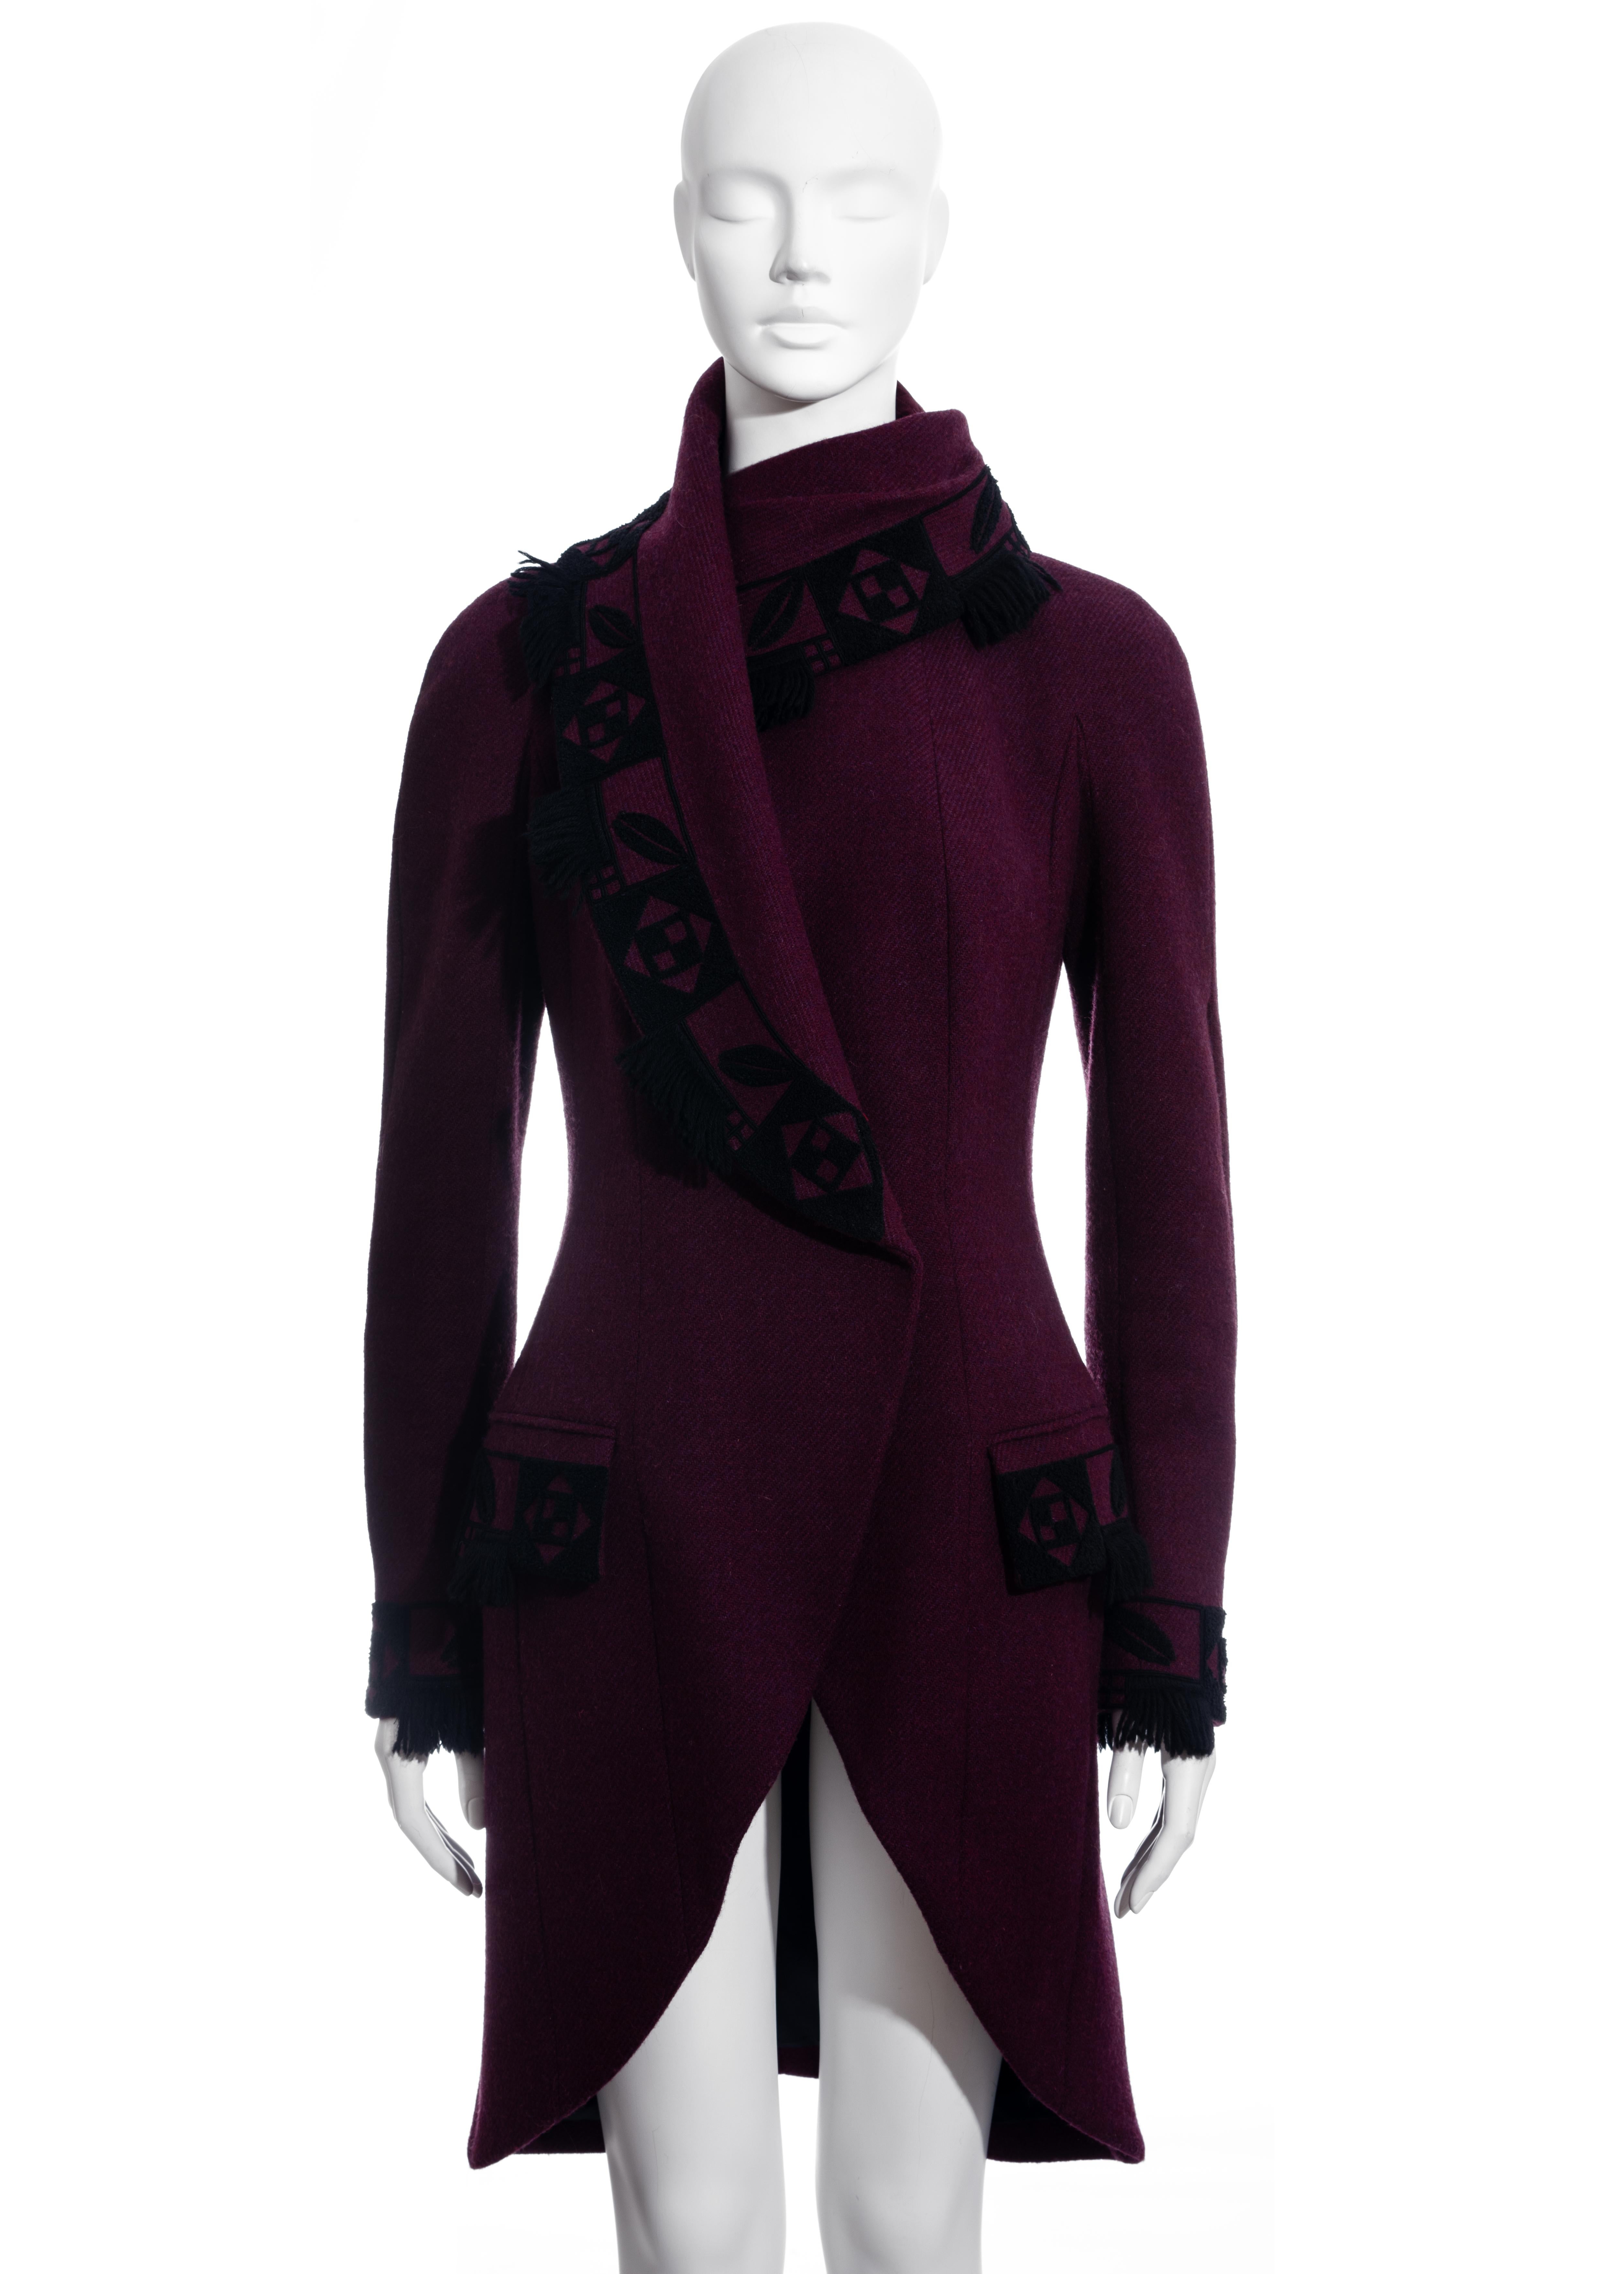 ▪ John Galliano plum wool coat
▪ 100% Wool, Lining: 100% Silk
▪ Black pattern trim with tassels  
▪ Fabric covered buttons on cuffs
▪ Shawl lapel draped around the neck fastening with hidden buttons 
▪ IT 44 - FR 40 - UK 12 - US 8
▪ Fall-Winter 1998